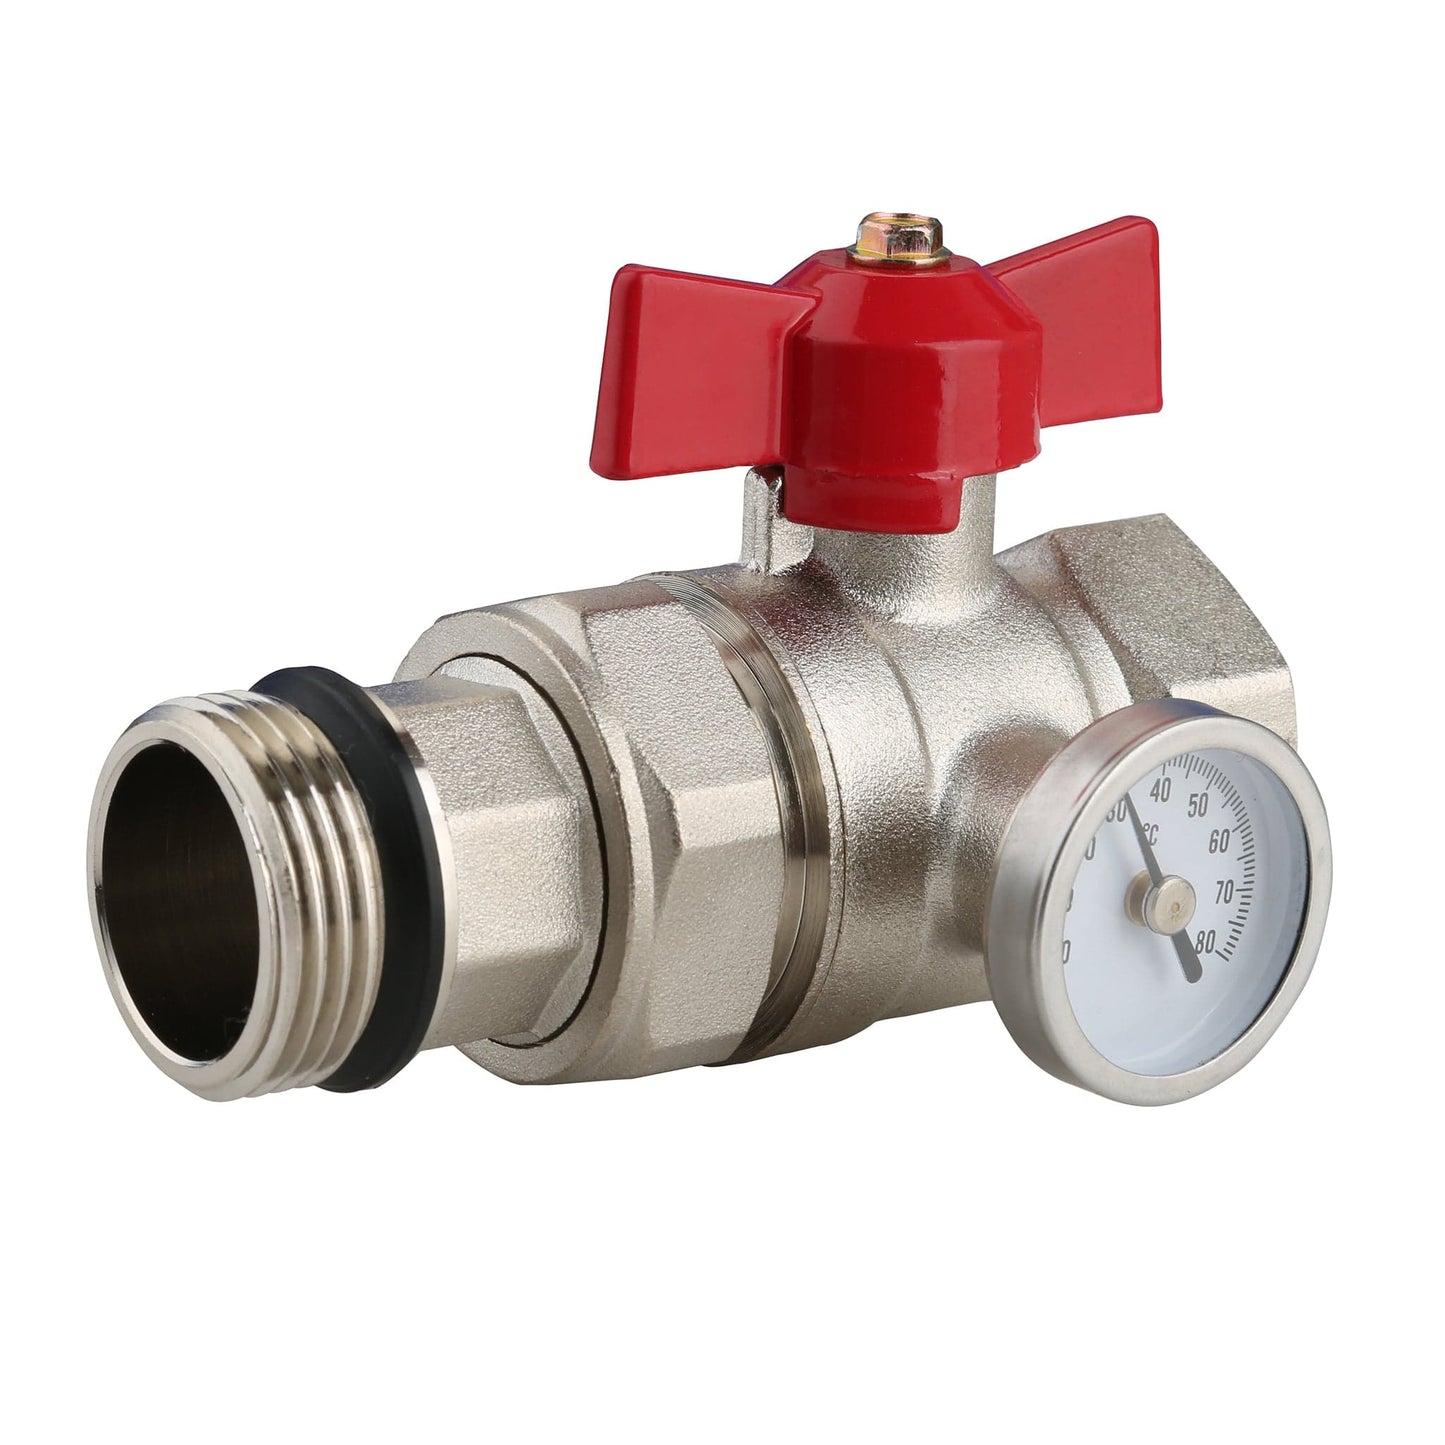 Pair of 1" Isolation Ball Valves With Temp Gauges | ZL-4012 BM01628